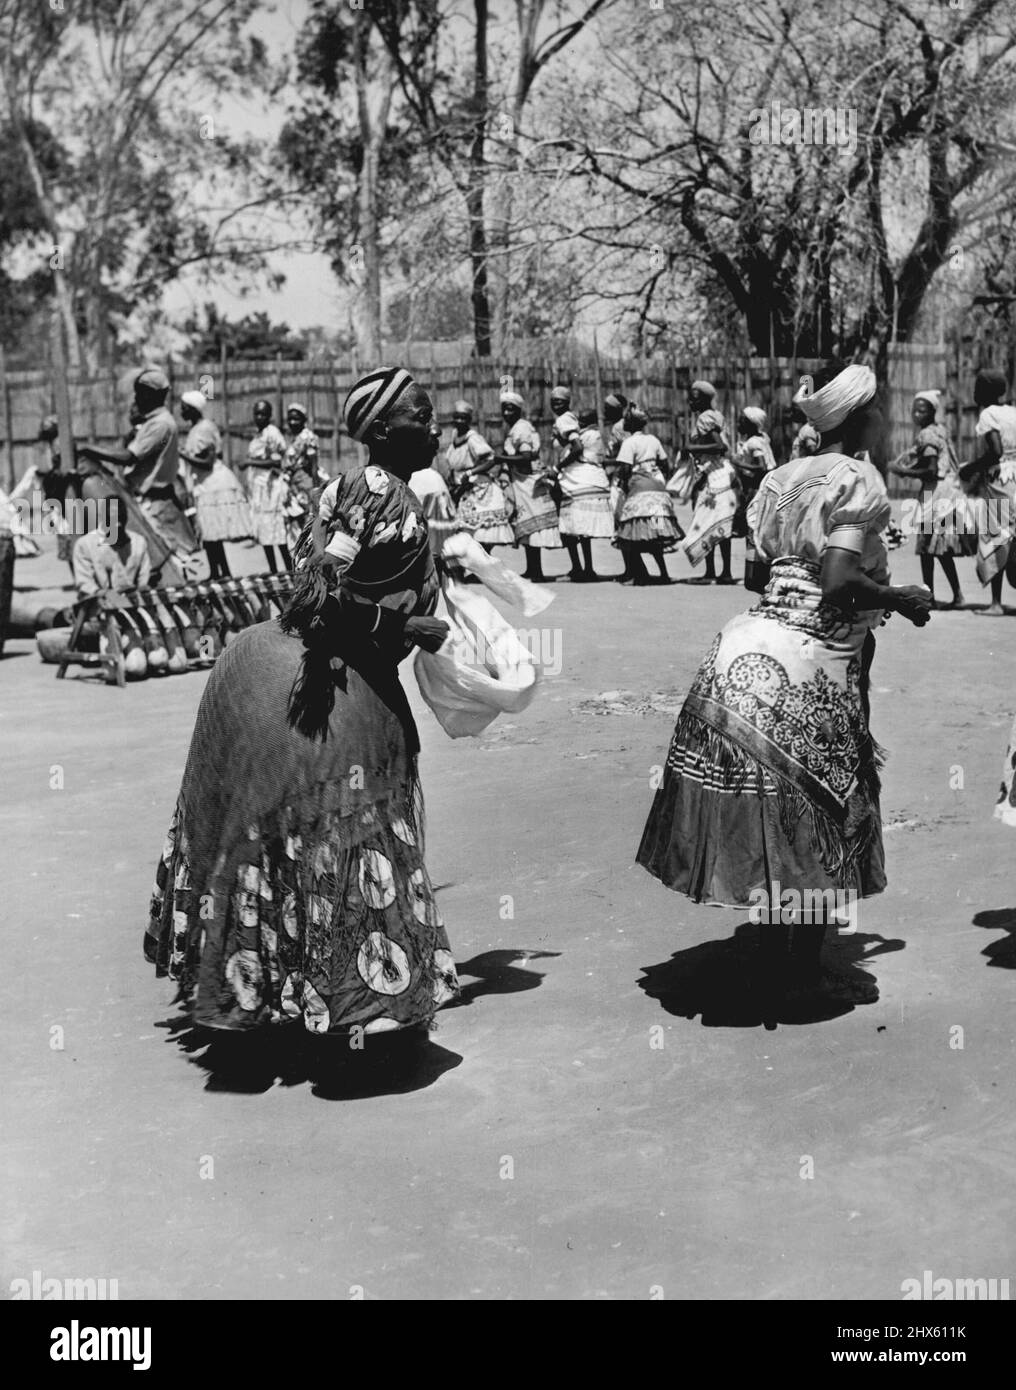 Barotse Women -- Women of the Barotse Chief's Court perform the Dance of Welcome, called the 'Limba'. It is a peculiar shuffling kind of dance to a rhythm provided by the Africa xylophone (Silimba) and drums made from gourds. It goes on for hours. In the foreground are two fine examples of the Court dress worn by the Barotse women. This was the dance that intrigued the former Secretary of State for the Colonies Mr. James Griffiths, on his recent visit to Barotseland. June 23, 1952. (Photo by Nig Stock Photo